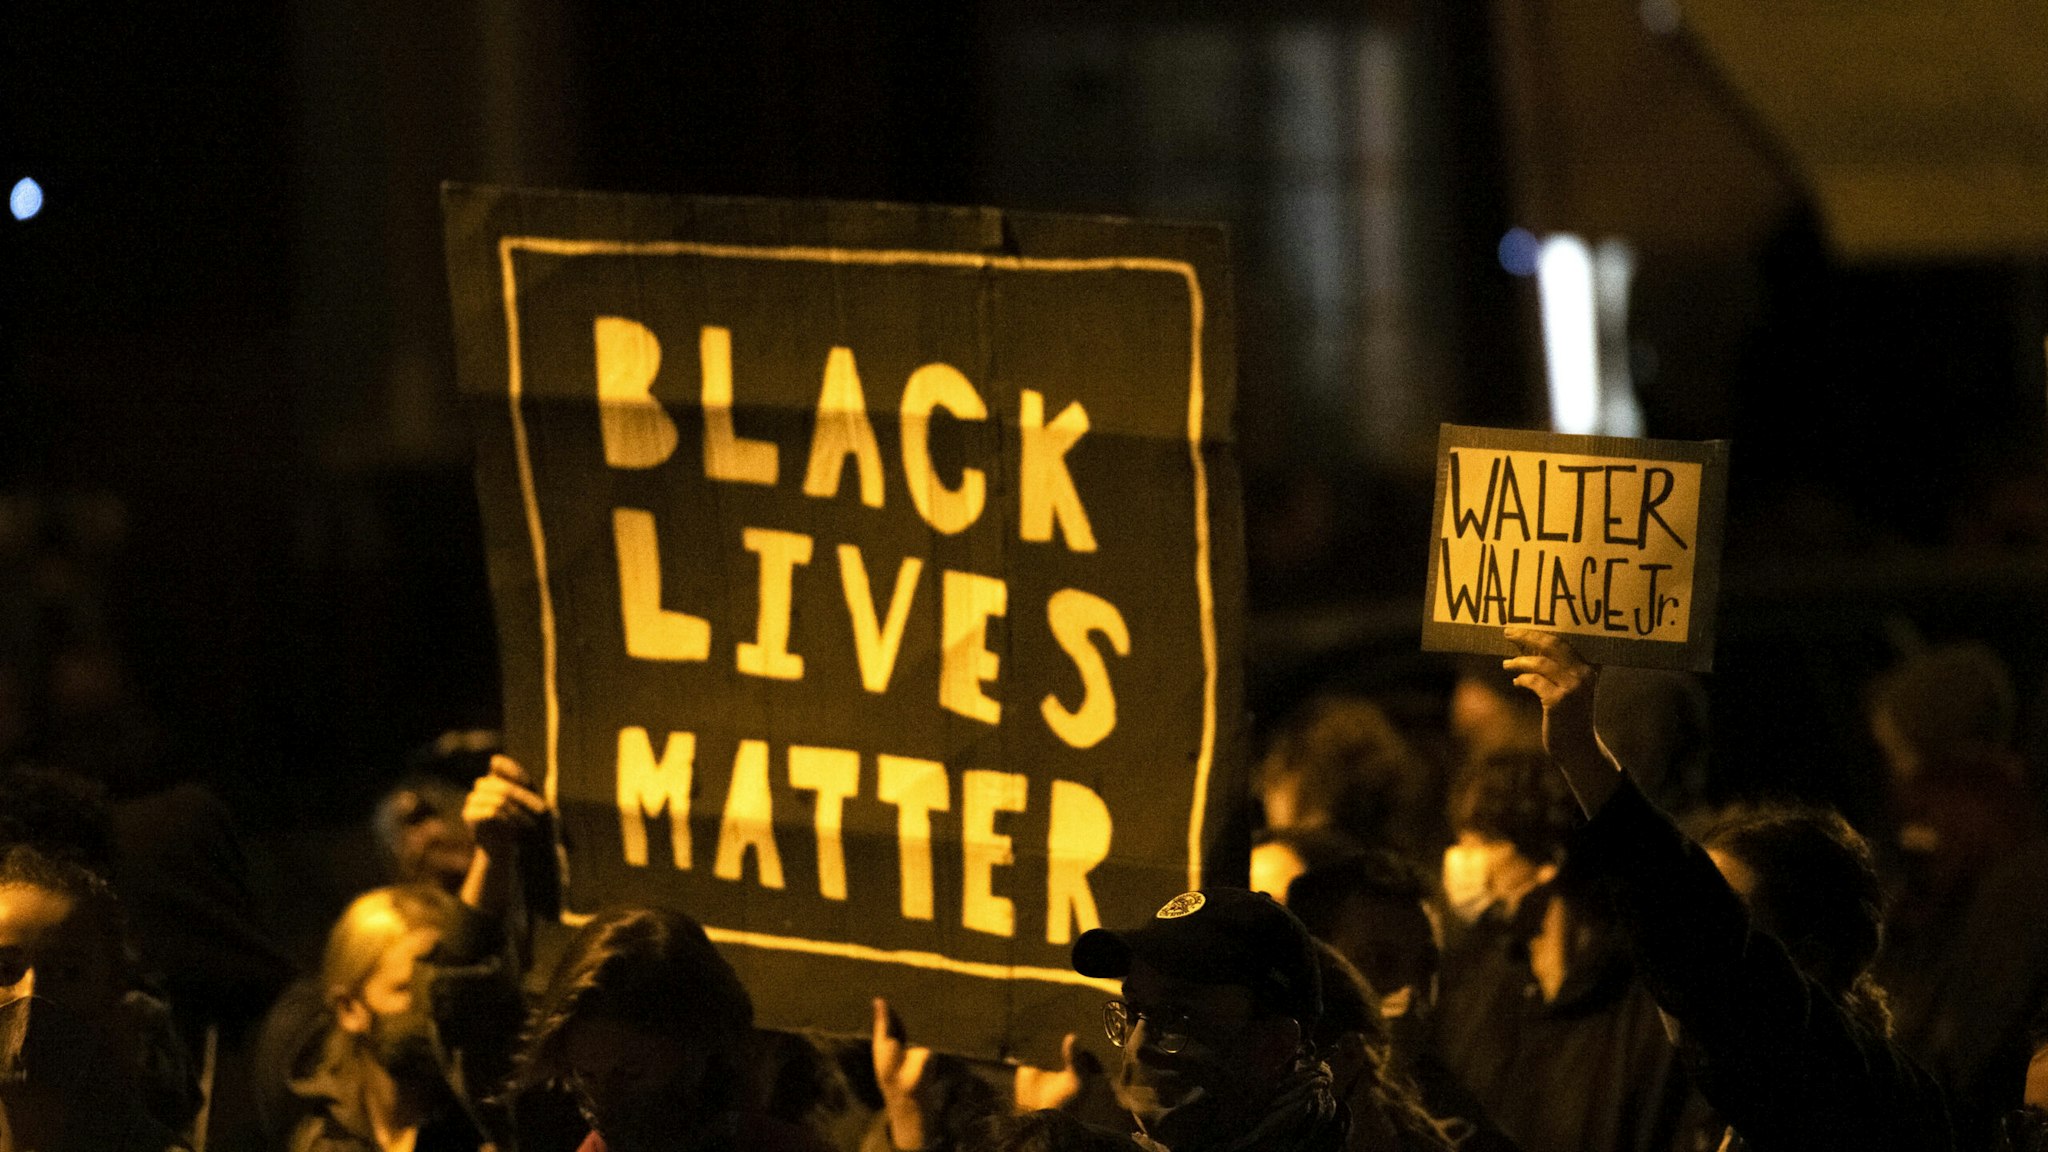 PHILADELPHIA, PA - OCTOBER 27: Demonstrators holding placards reading "BLACK LIVES MATTER" and "WALTER WALLACE JR." during a protest near the location where Walter Wallace, Jr. was killed by two police officers on October 27, 2020 in Philadelphia, Pennsylvania. Protests erupted after the fatal shooting of 27-year-old Wallace Jr, who Philadelphia police officers claimed was armed with a knife.